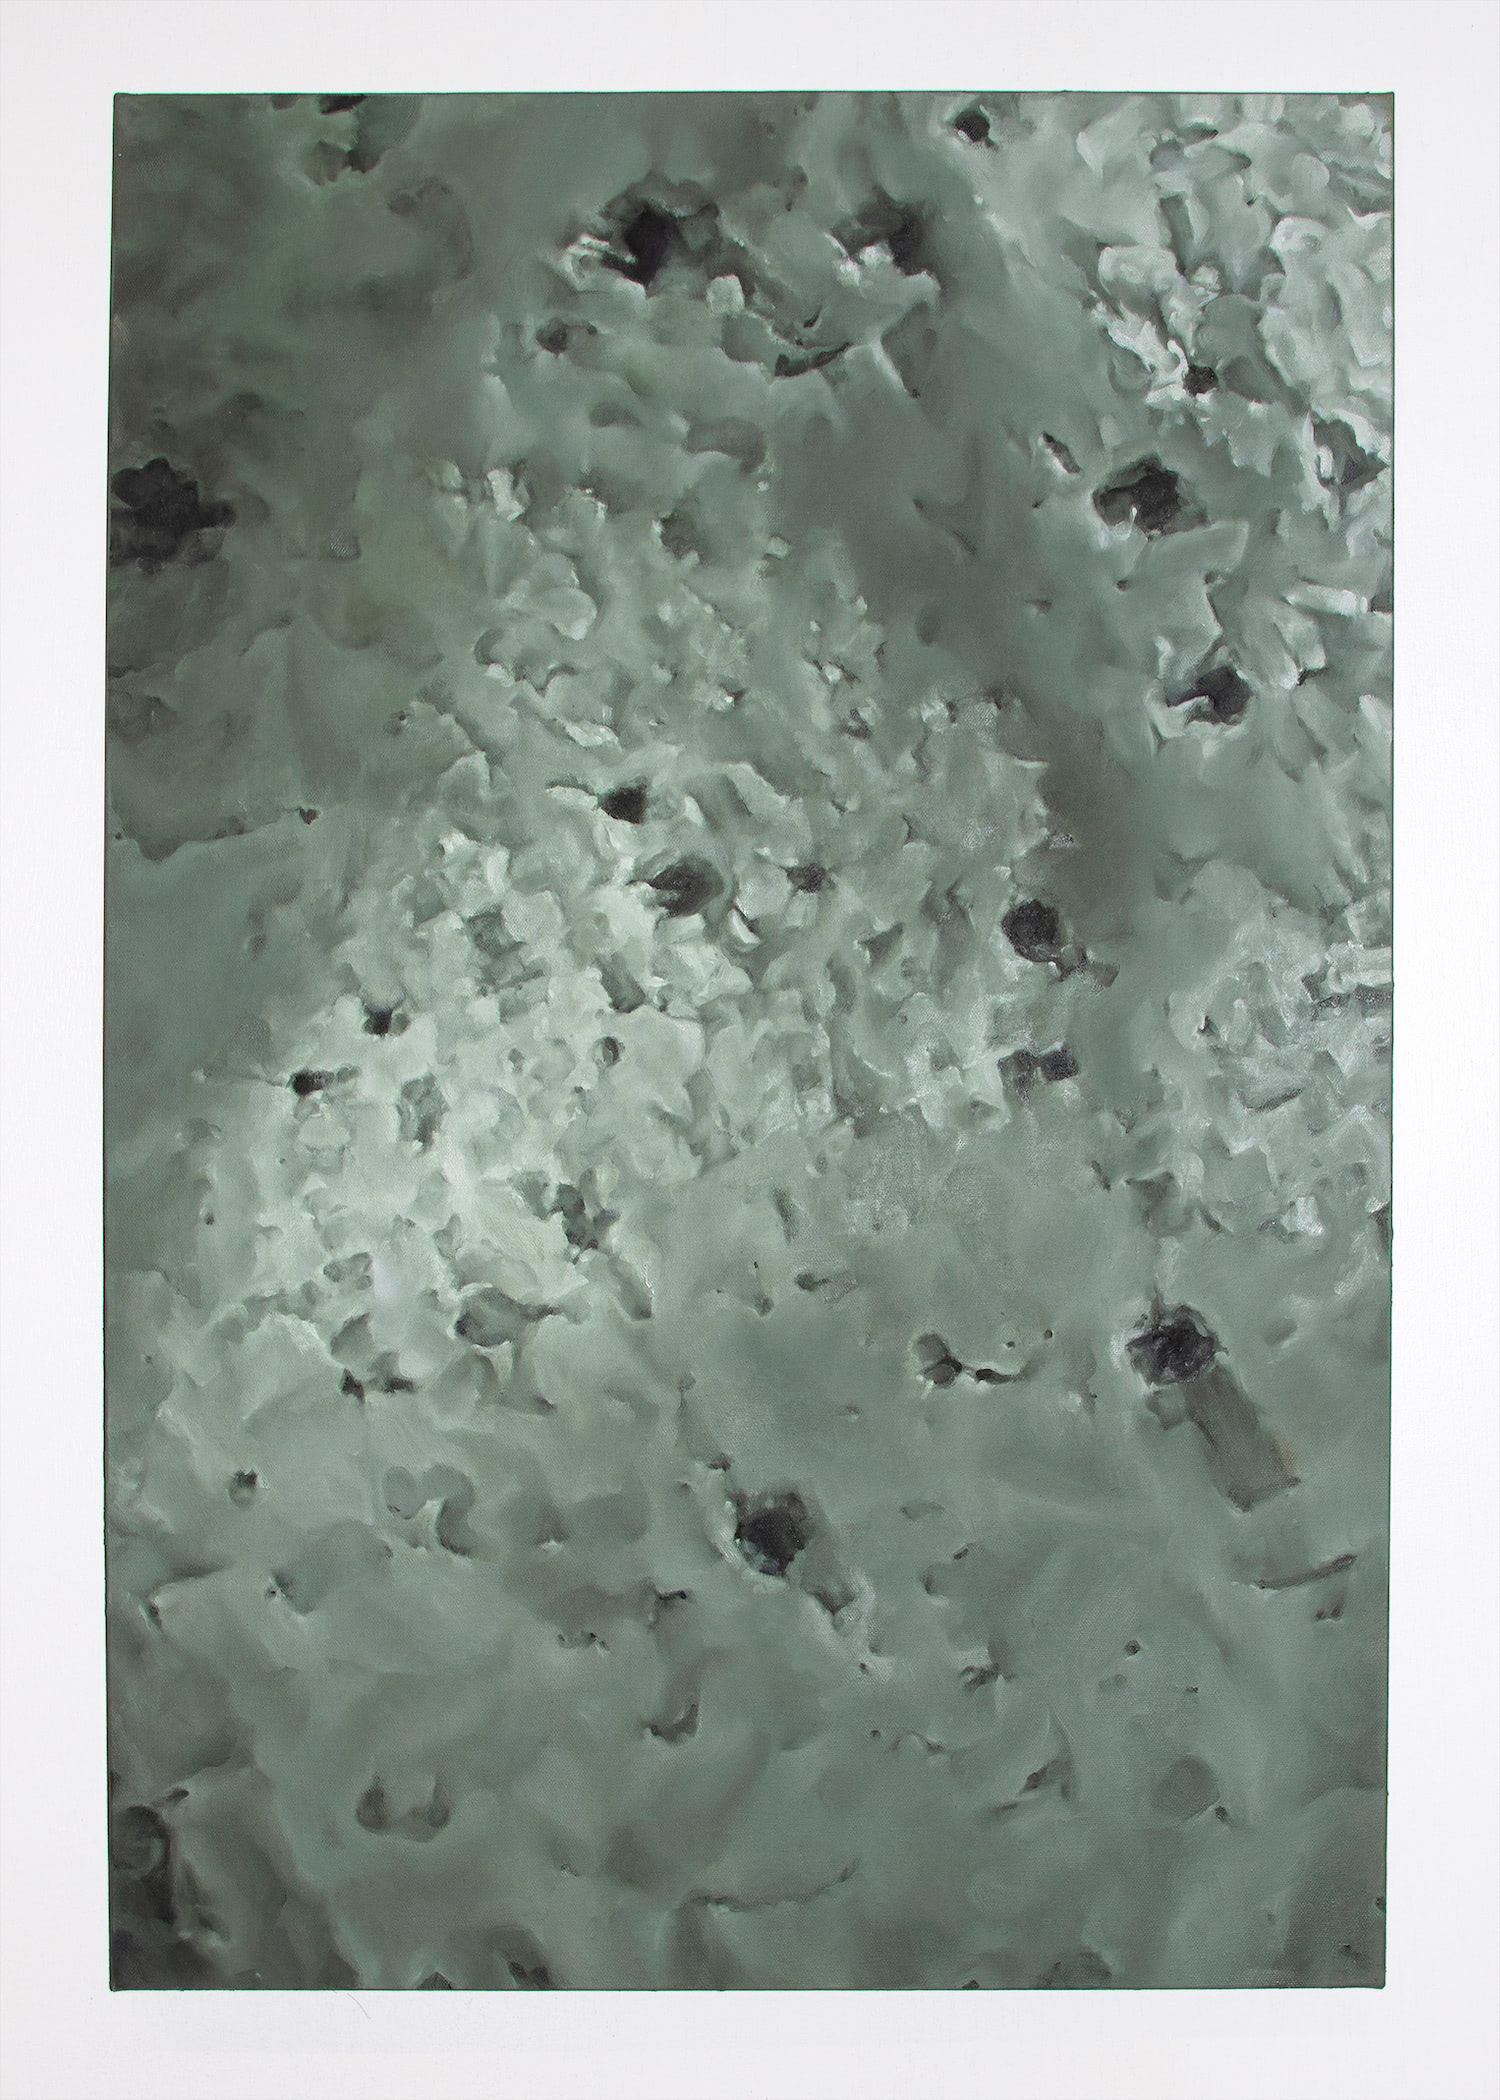 A teal colored stone with a porous surface painted on a vertical, rectangular canvas.